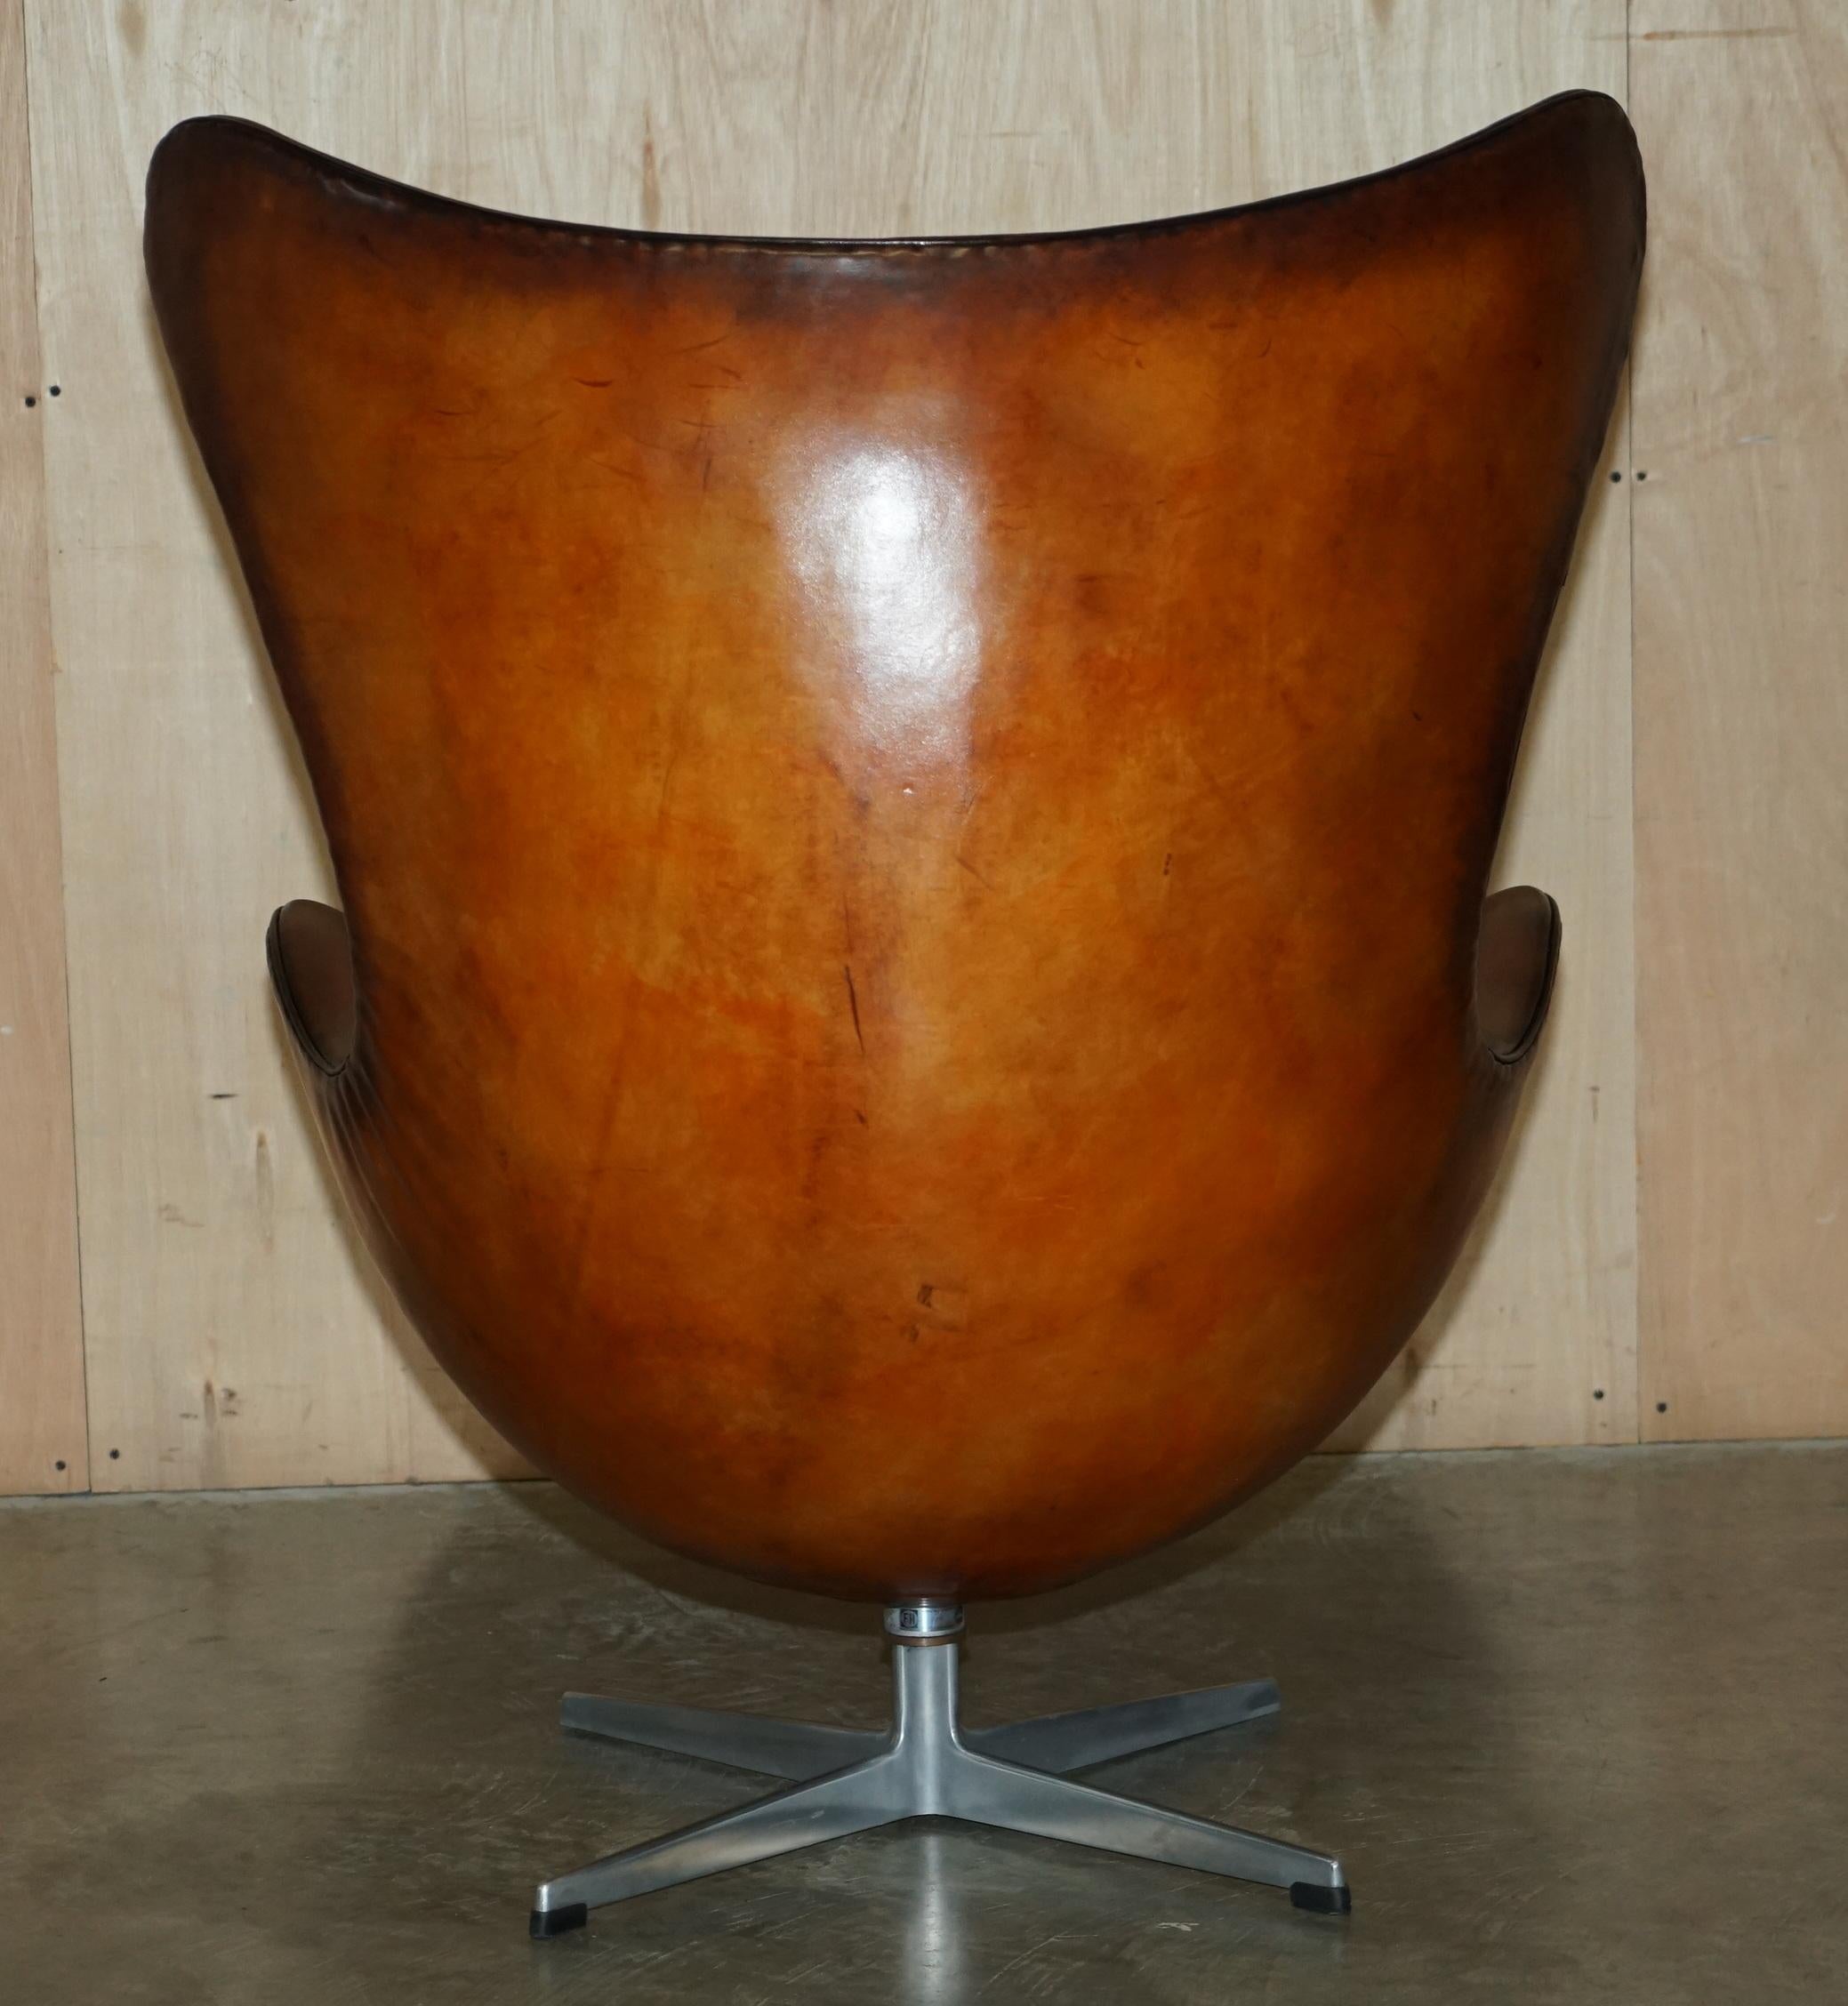 ORIGINAL FULLY RESTORED 1968 FRITZ HANSEN EGG CHAiR & FOOTSTOOL IN BROWN LEATHER For Sale 2